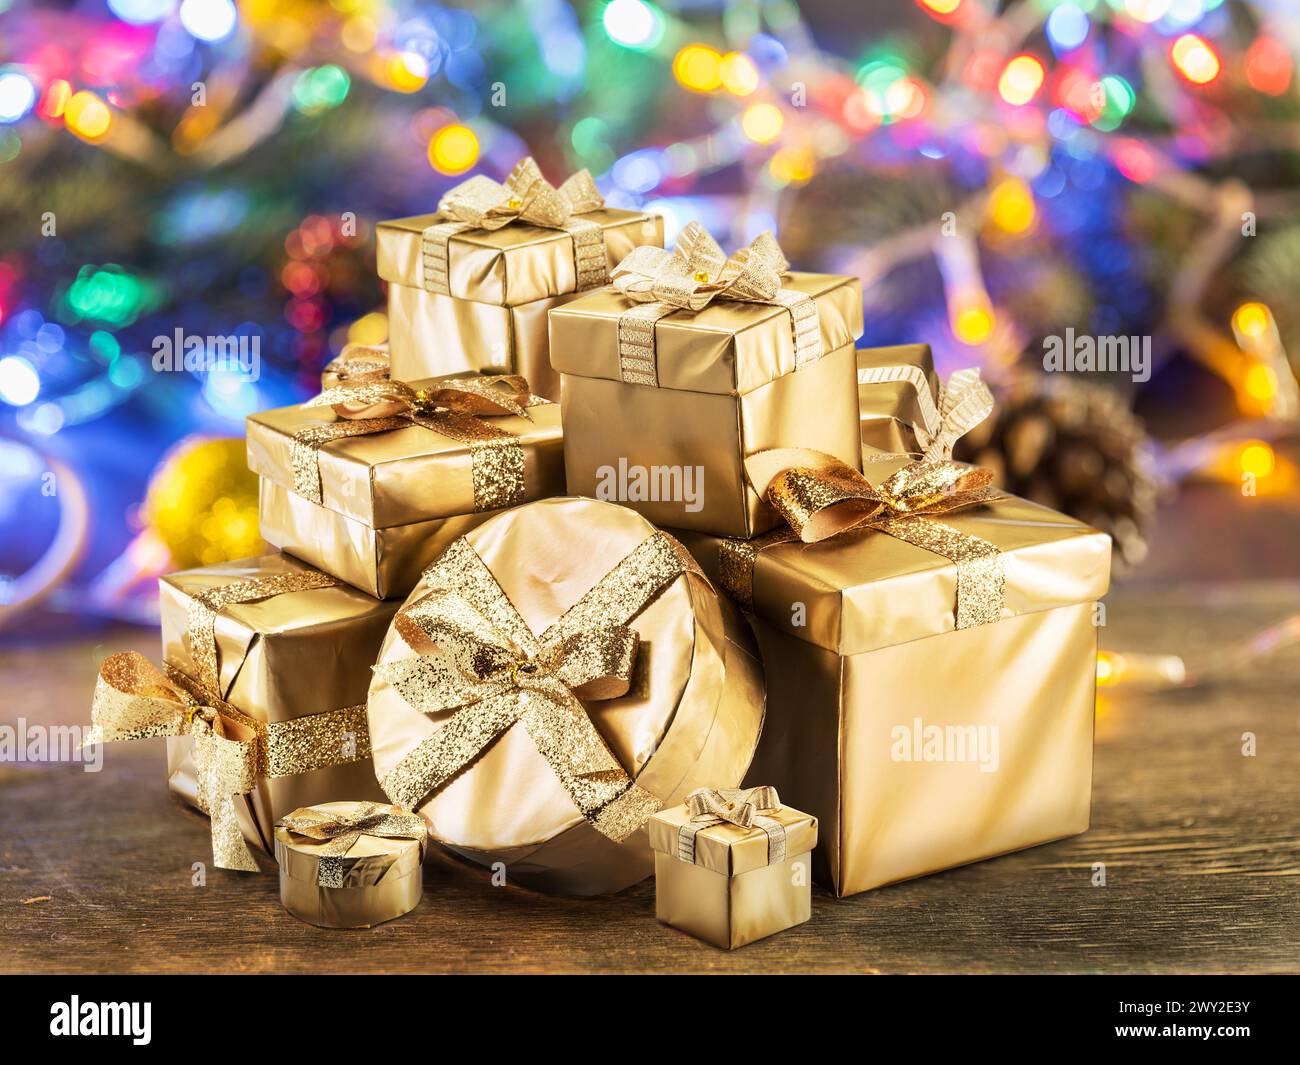 Christmas gifts as the symbol of Christmas happiness and miracle. Sparkling fairy lights at the background. Stock Photo